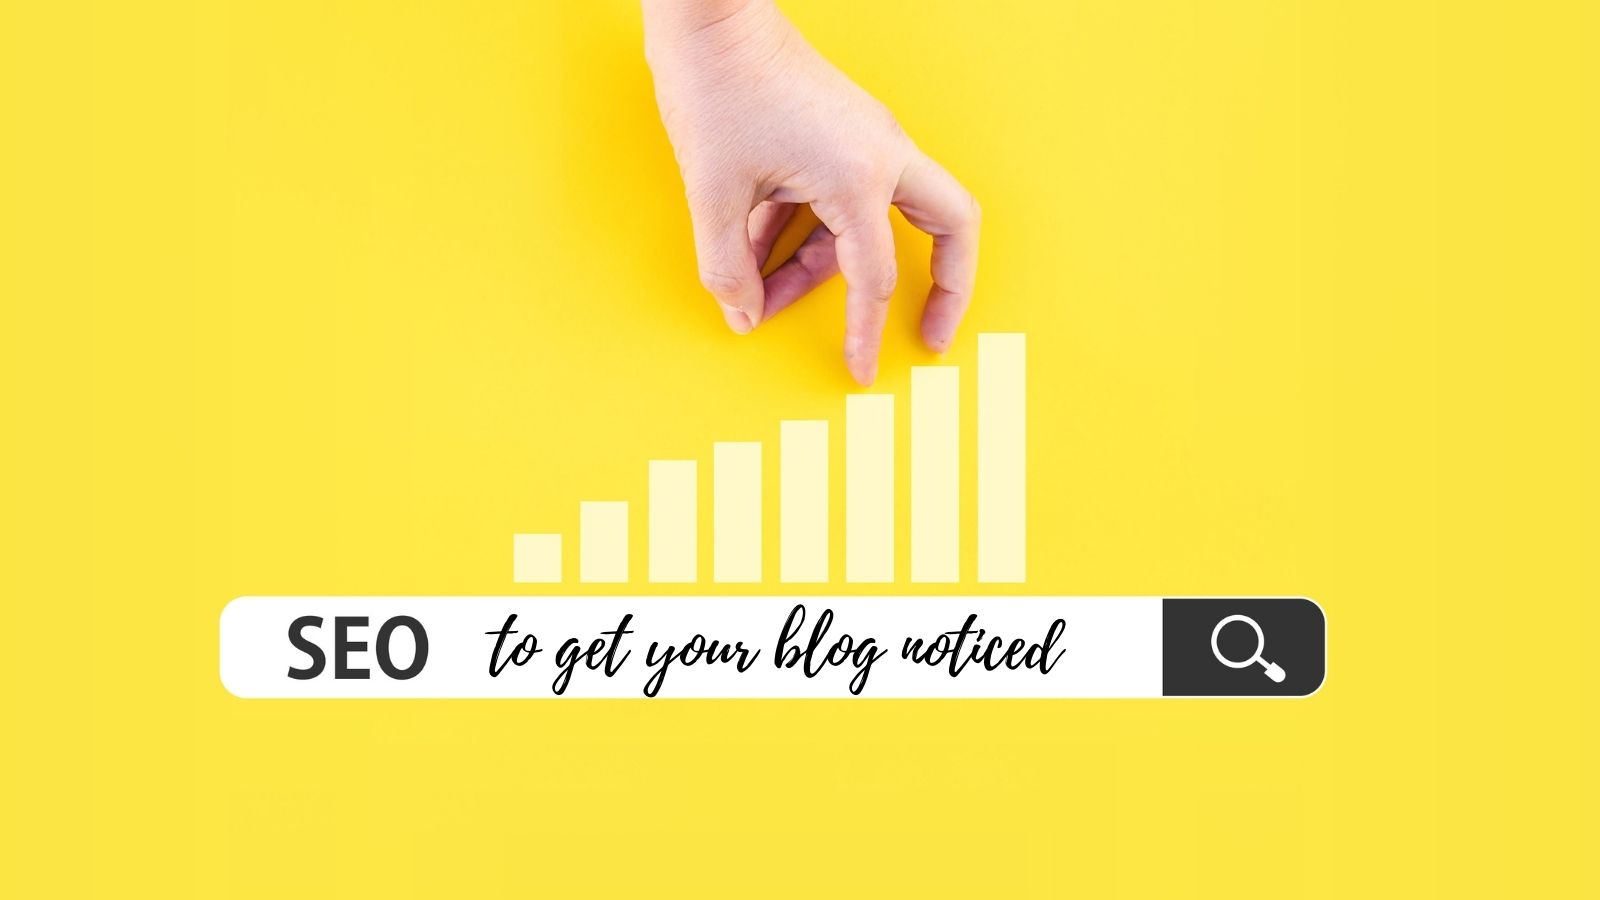 use SEO to get your blog noticed